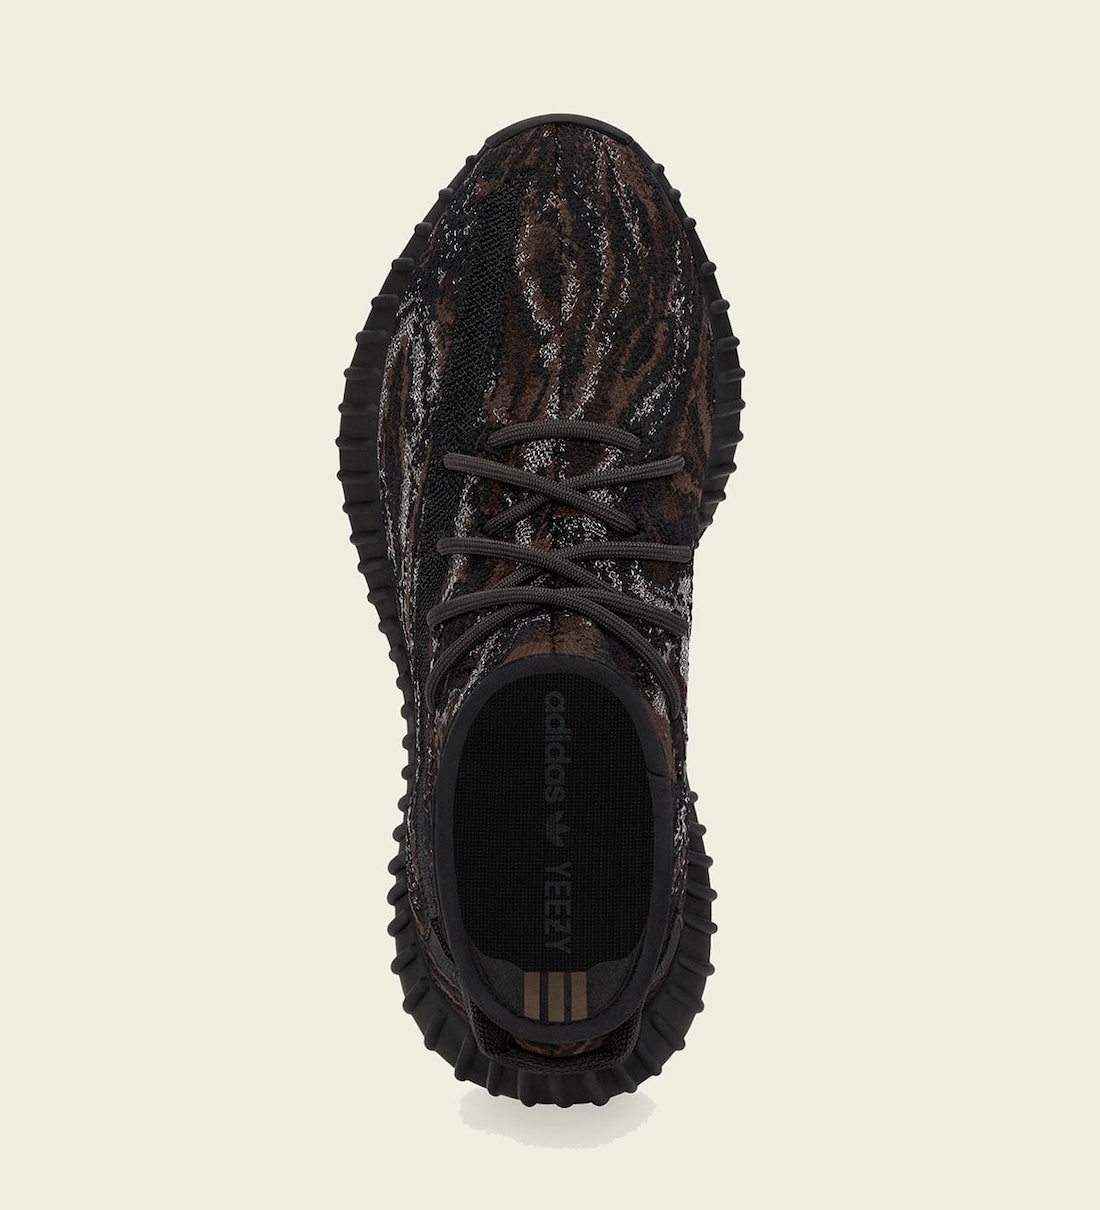 adidas Yeezy Boost 350 V2 MX Rock GW3774 Release Date Price 3